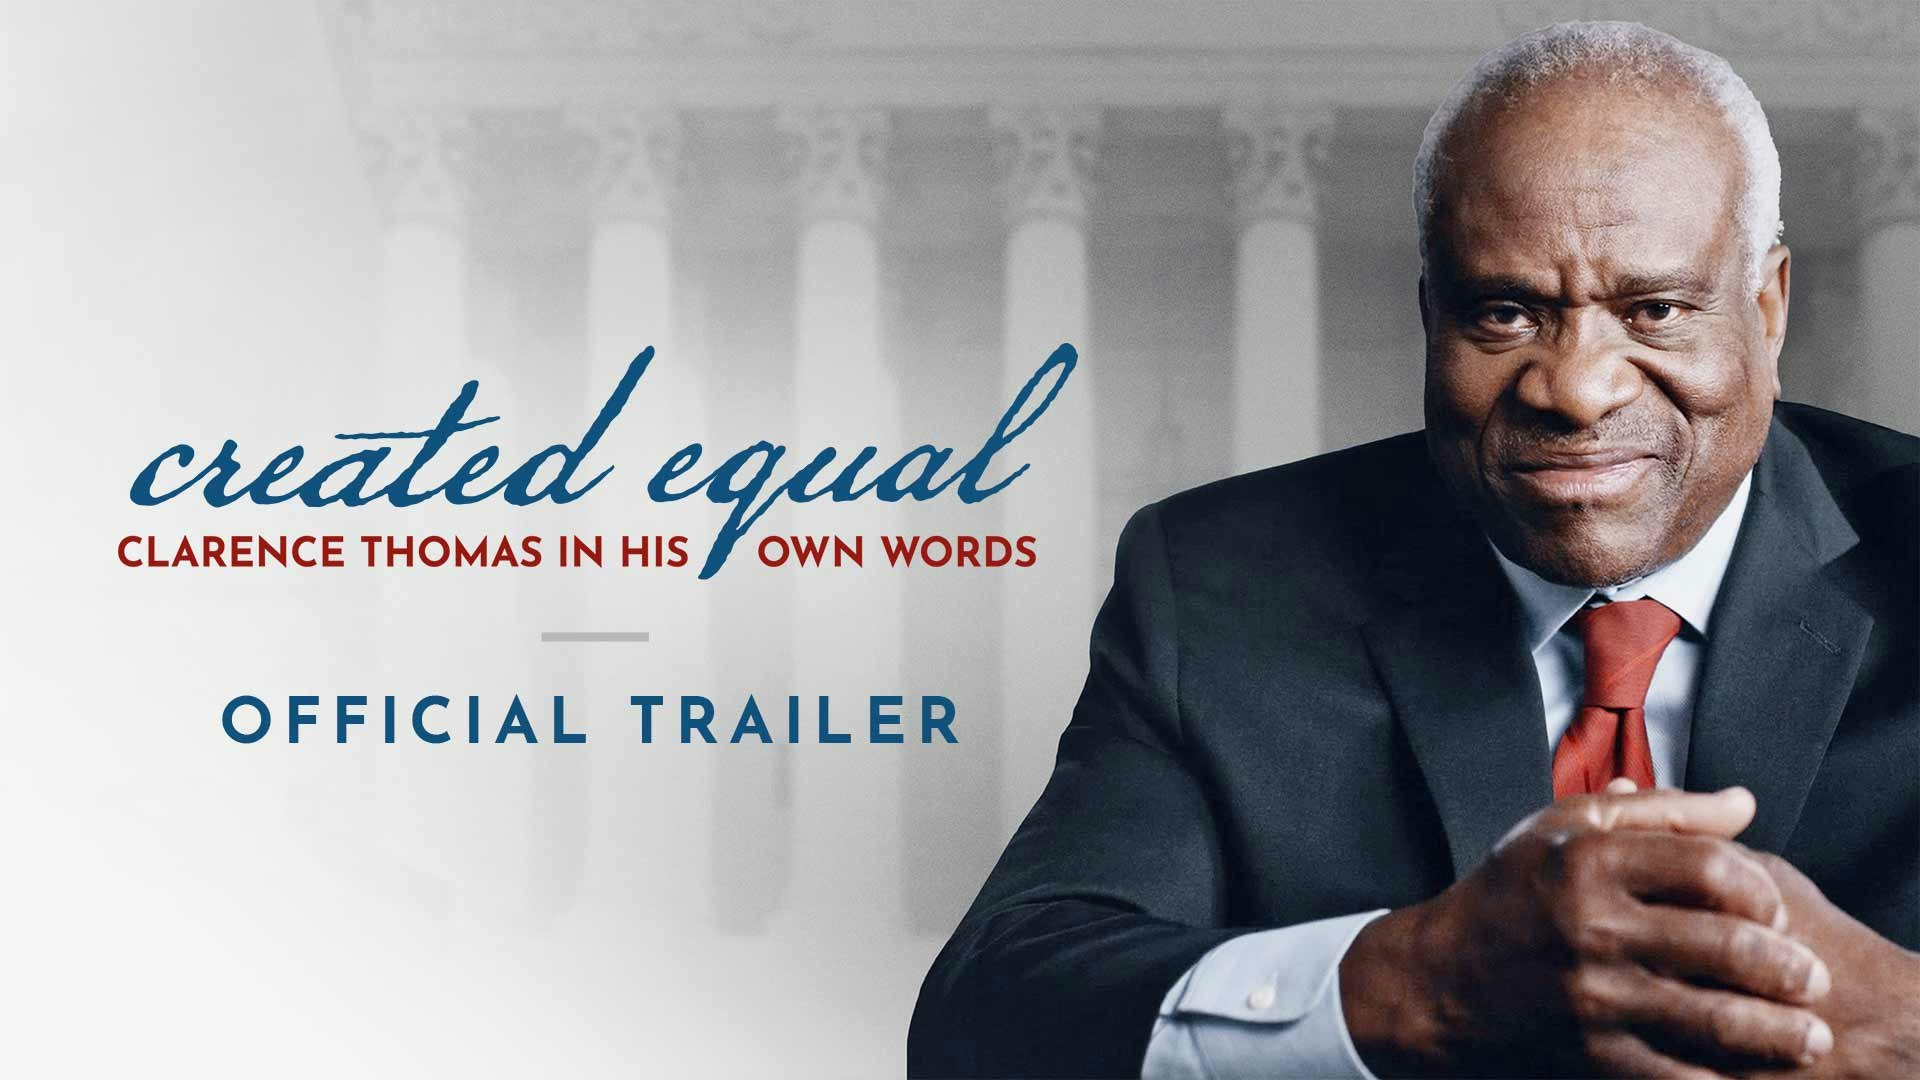 Created Equal: Clarence Thomas in His Own Words | Official Trailer